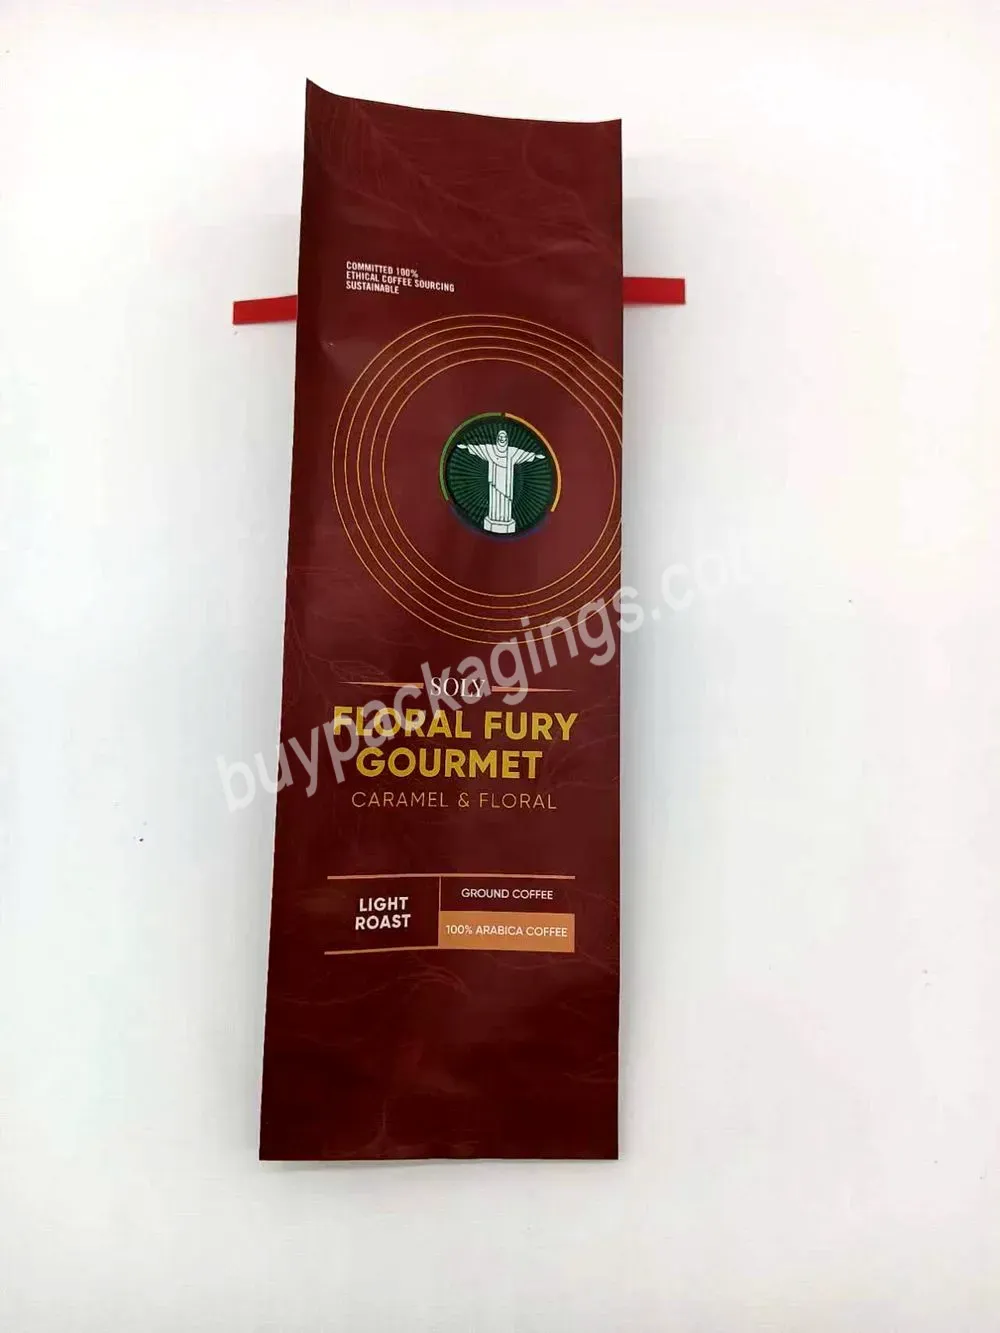 Recycle 250g 500g 1000g 2kg Custom Printed Eight Side Seal Flat Bottom Coffee Beans Packaging Bags With Valve And Zipper - Buy Custom Coffee Packaging,Coffee Bag With Coffee Design,Coffee Bag With Coffee Design.